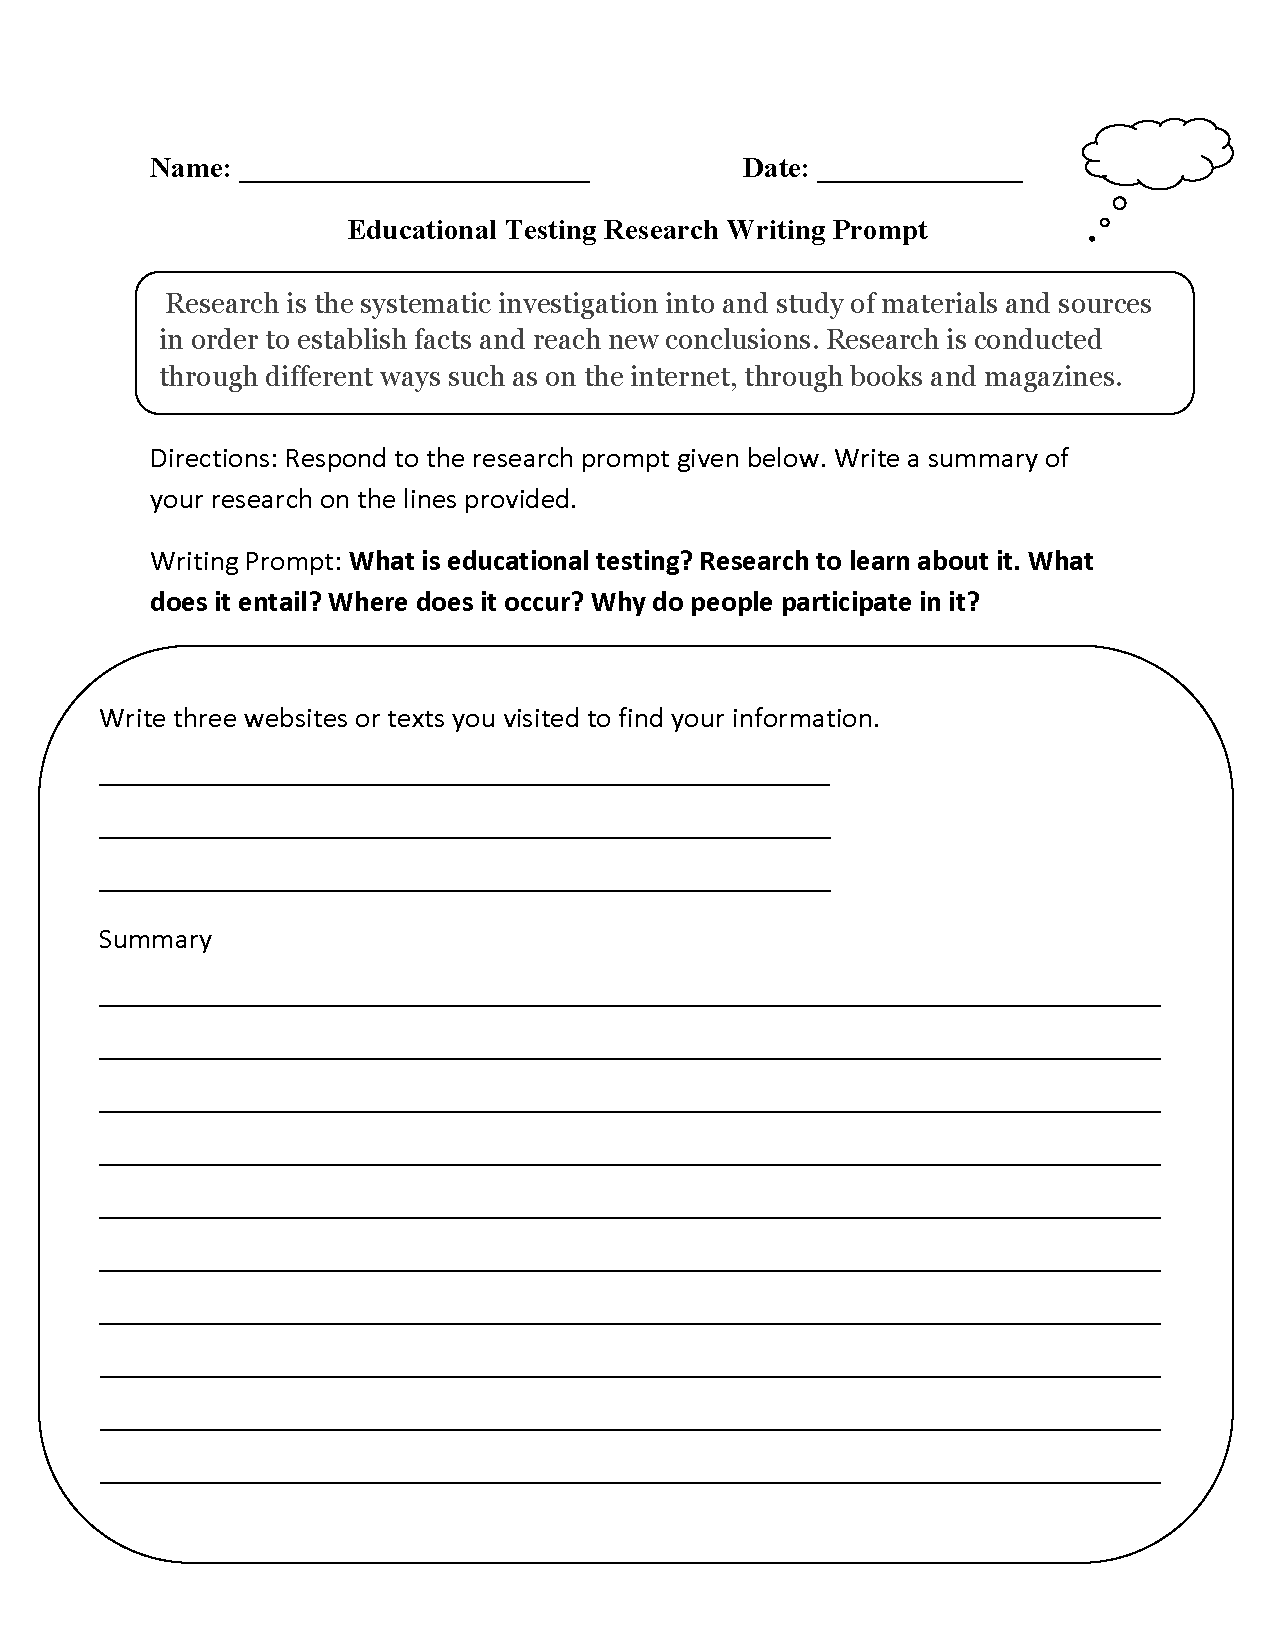 Educational Testing Research Writing Prompts Worksheets